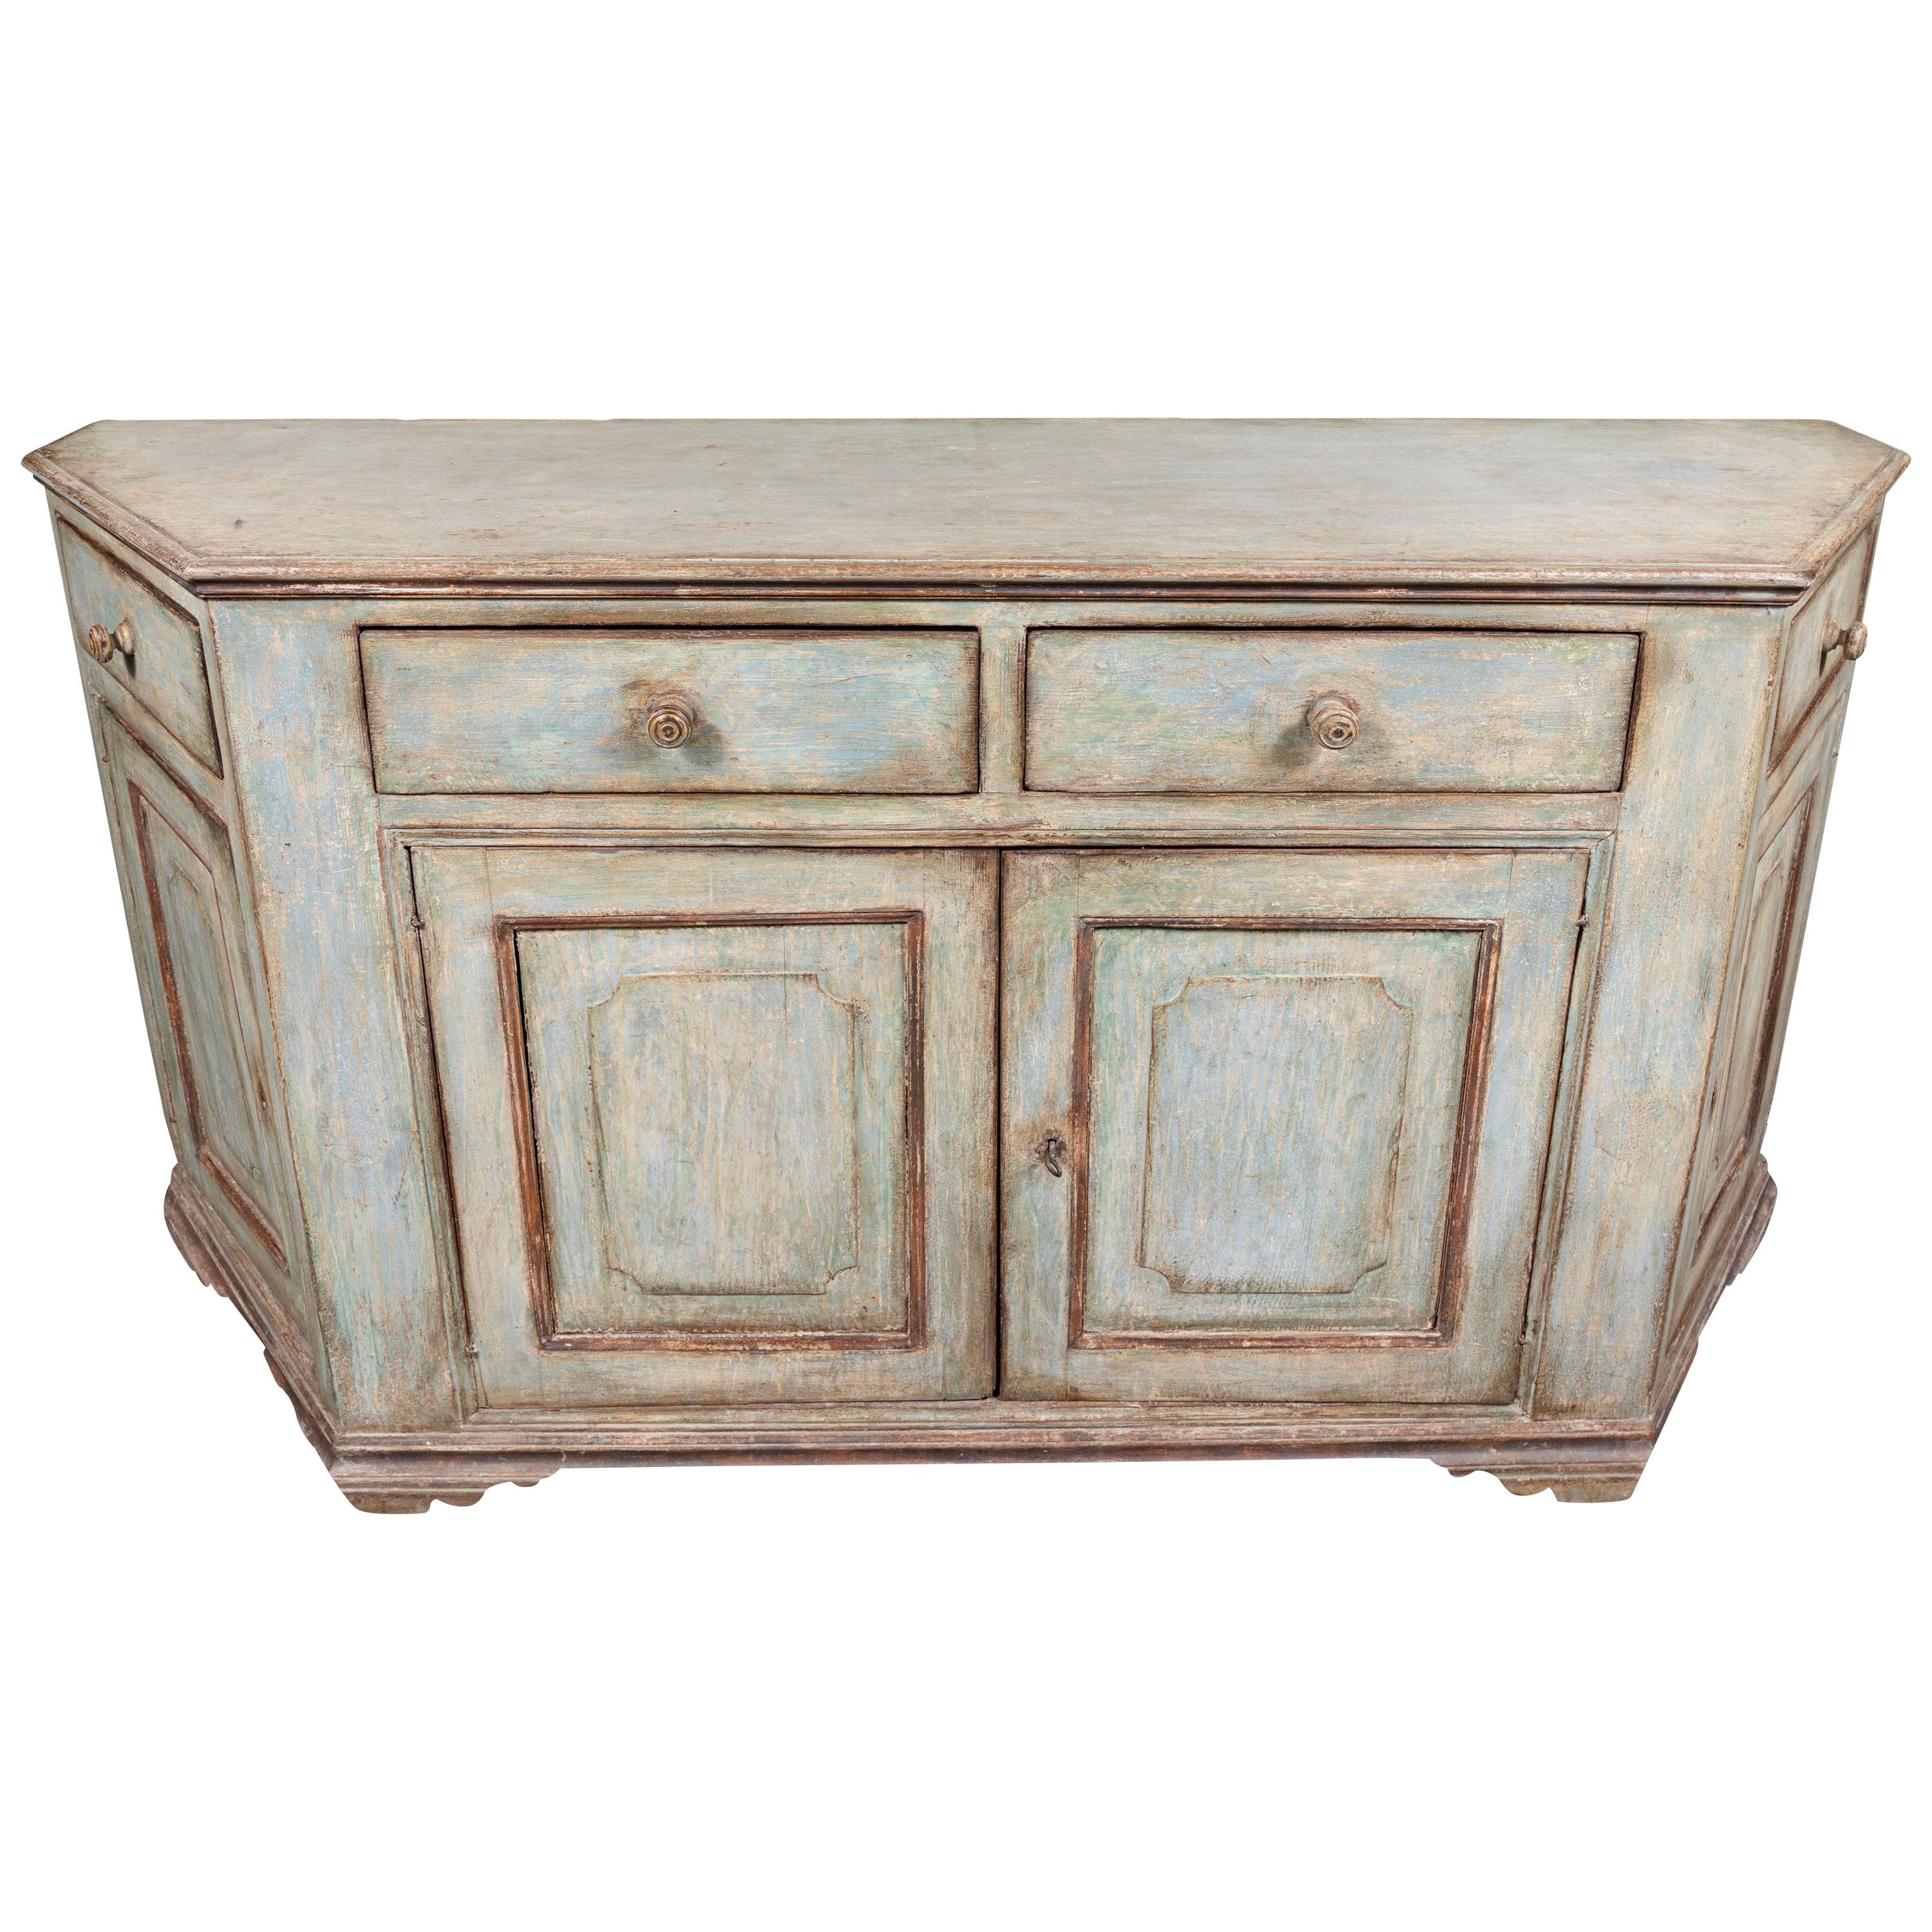 Antique, Four Door, Painted Tuscan Buffet